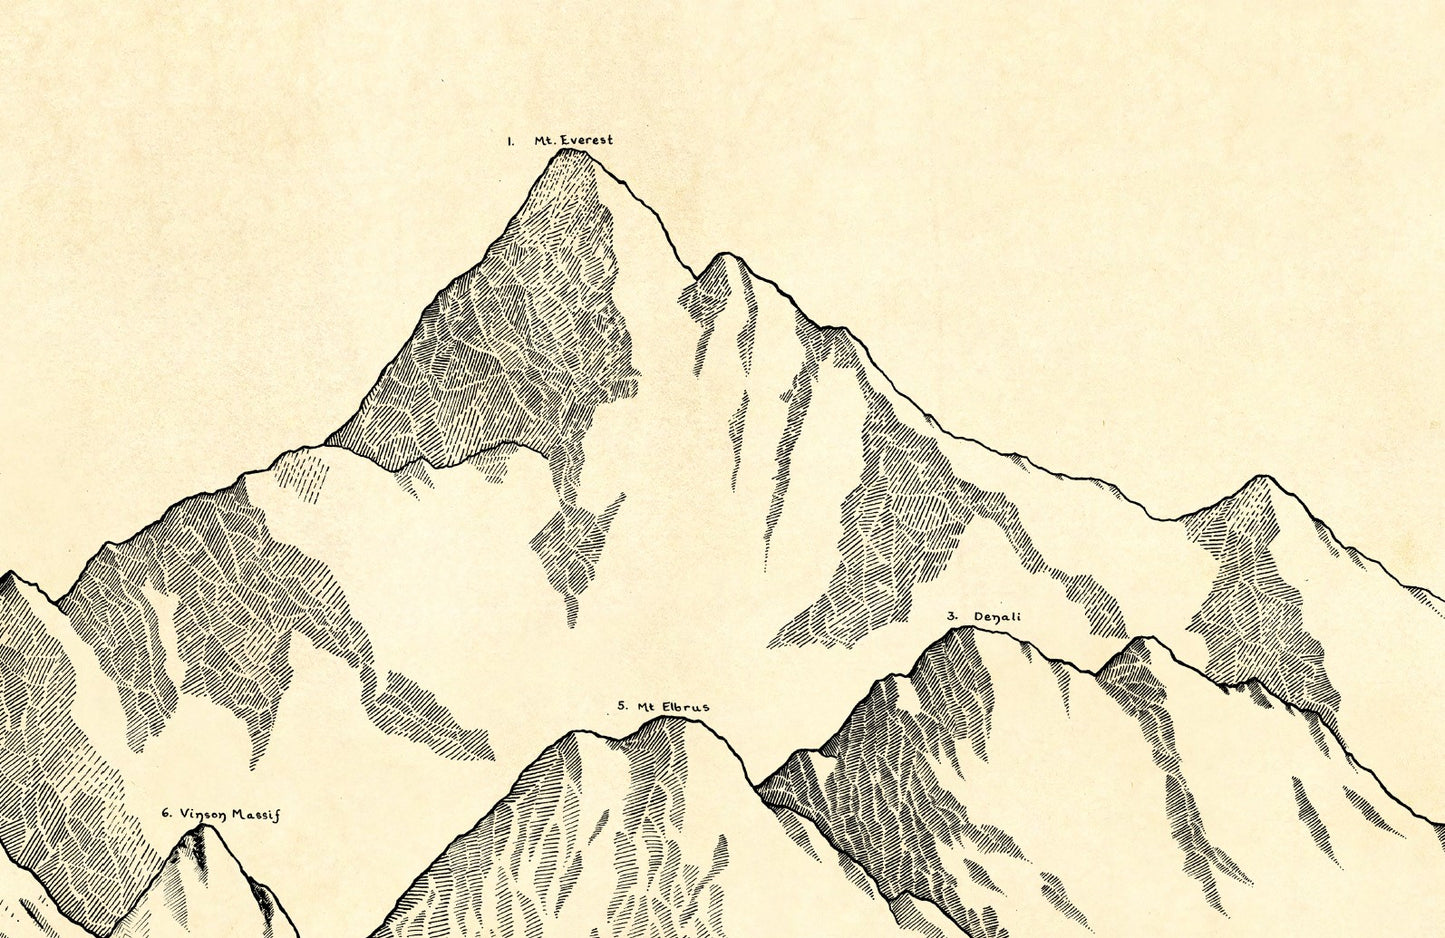 The Seven Summits Map